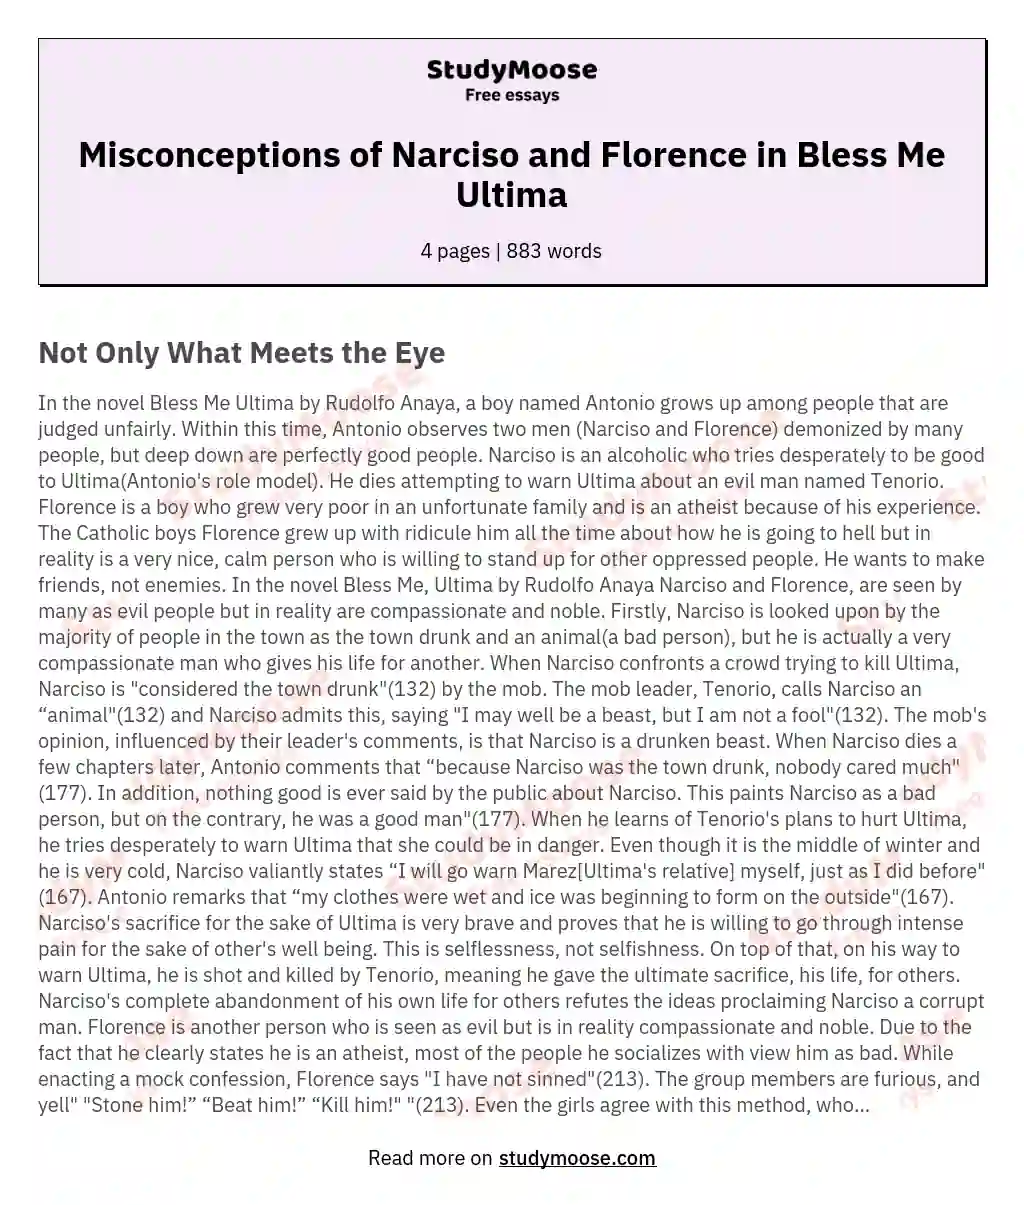 Misconceptions of Narciso and Florence in Bless Me Ultima essay